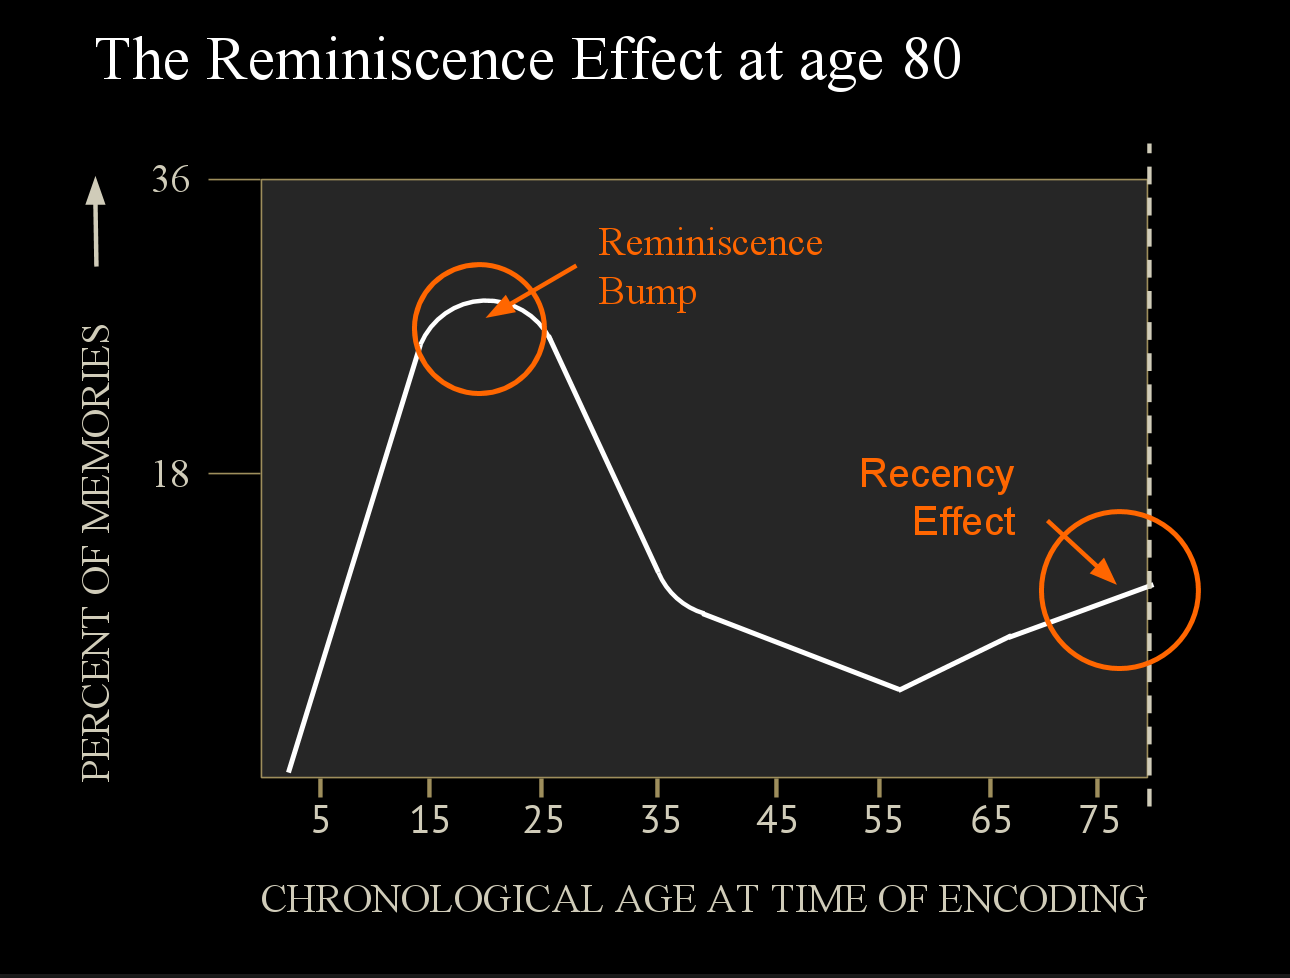 This camel graph of reminiscence starts at zero and stays there for a bit, since nobody remembers much before the age of two or three. Retrieval climbs very quickly however, reaching its peak by age twenty.